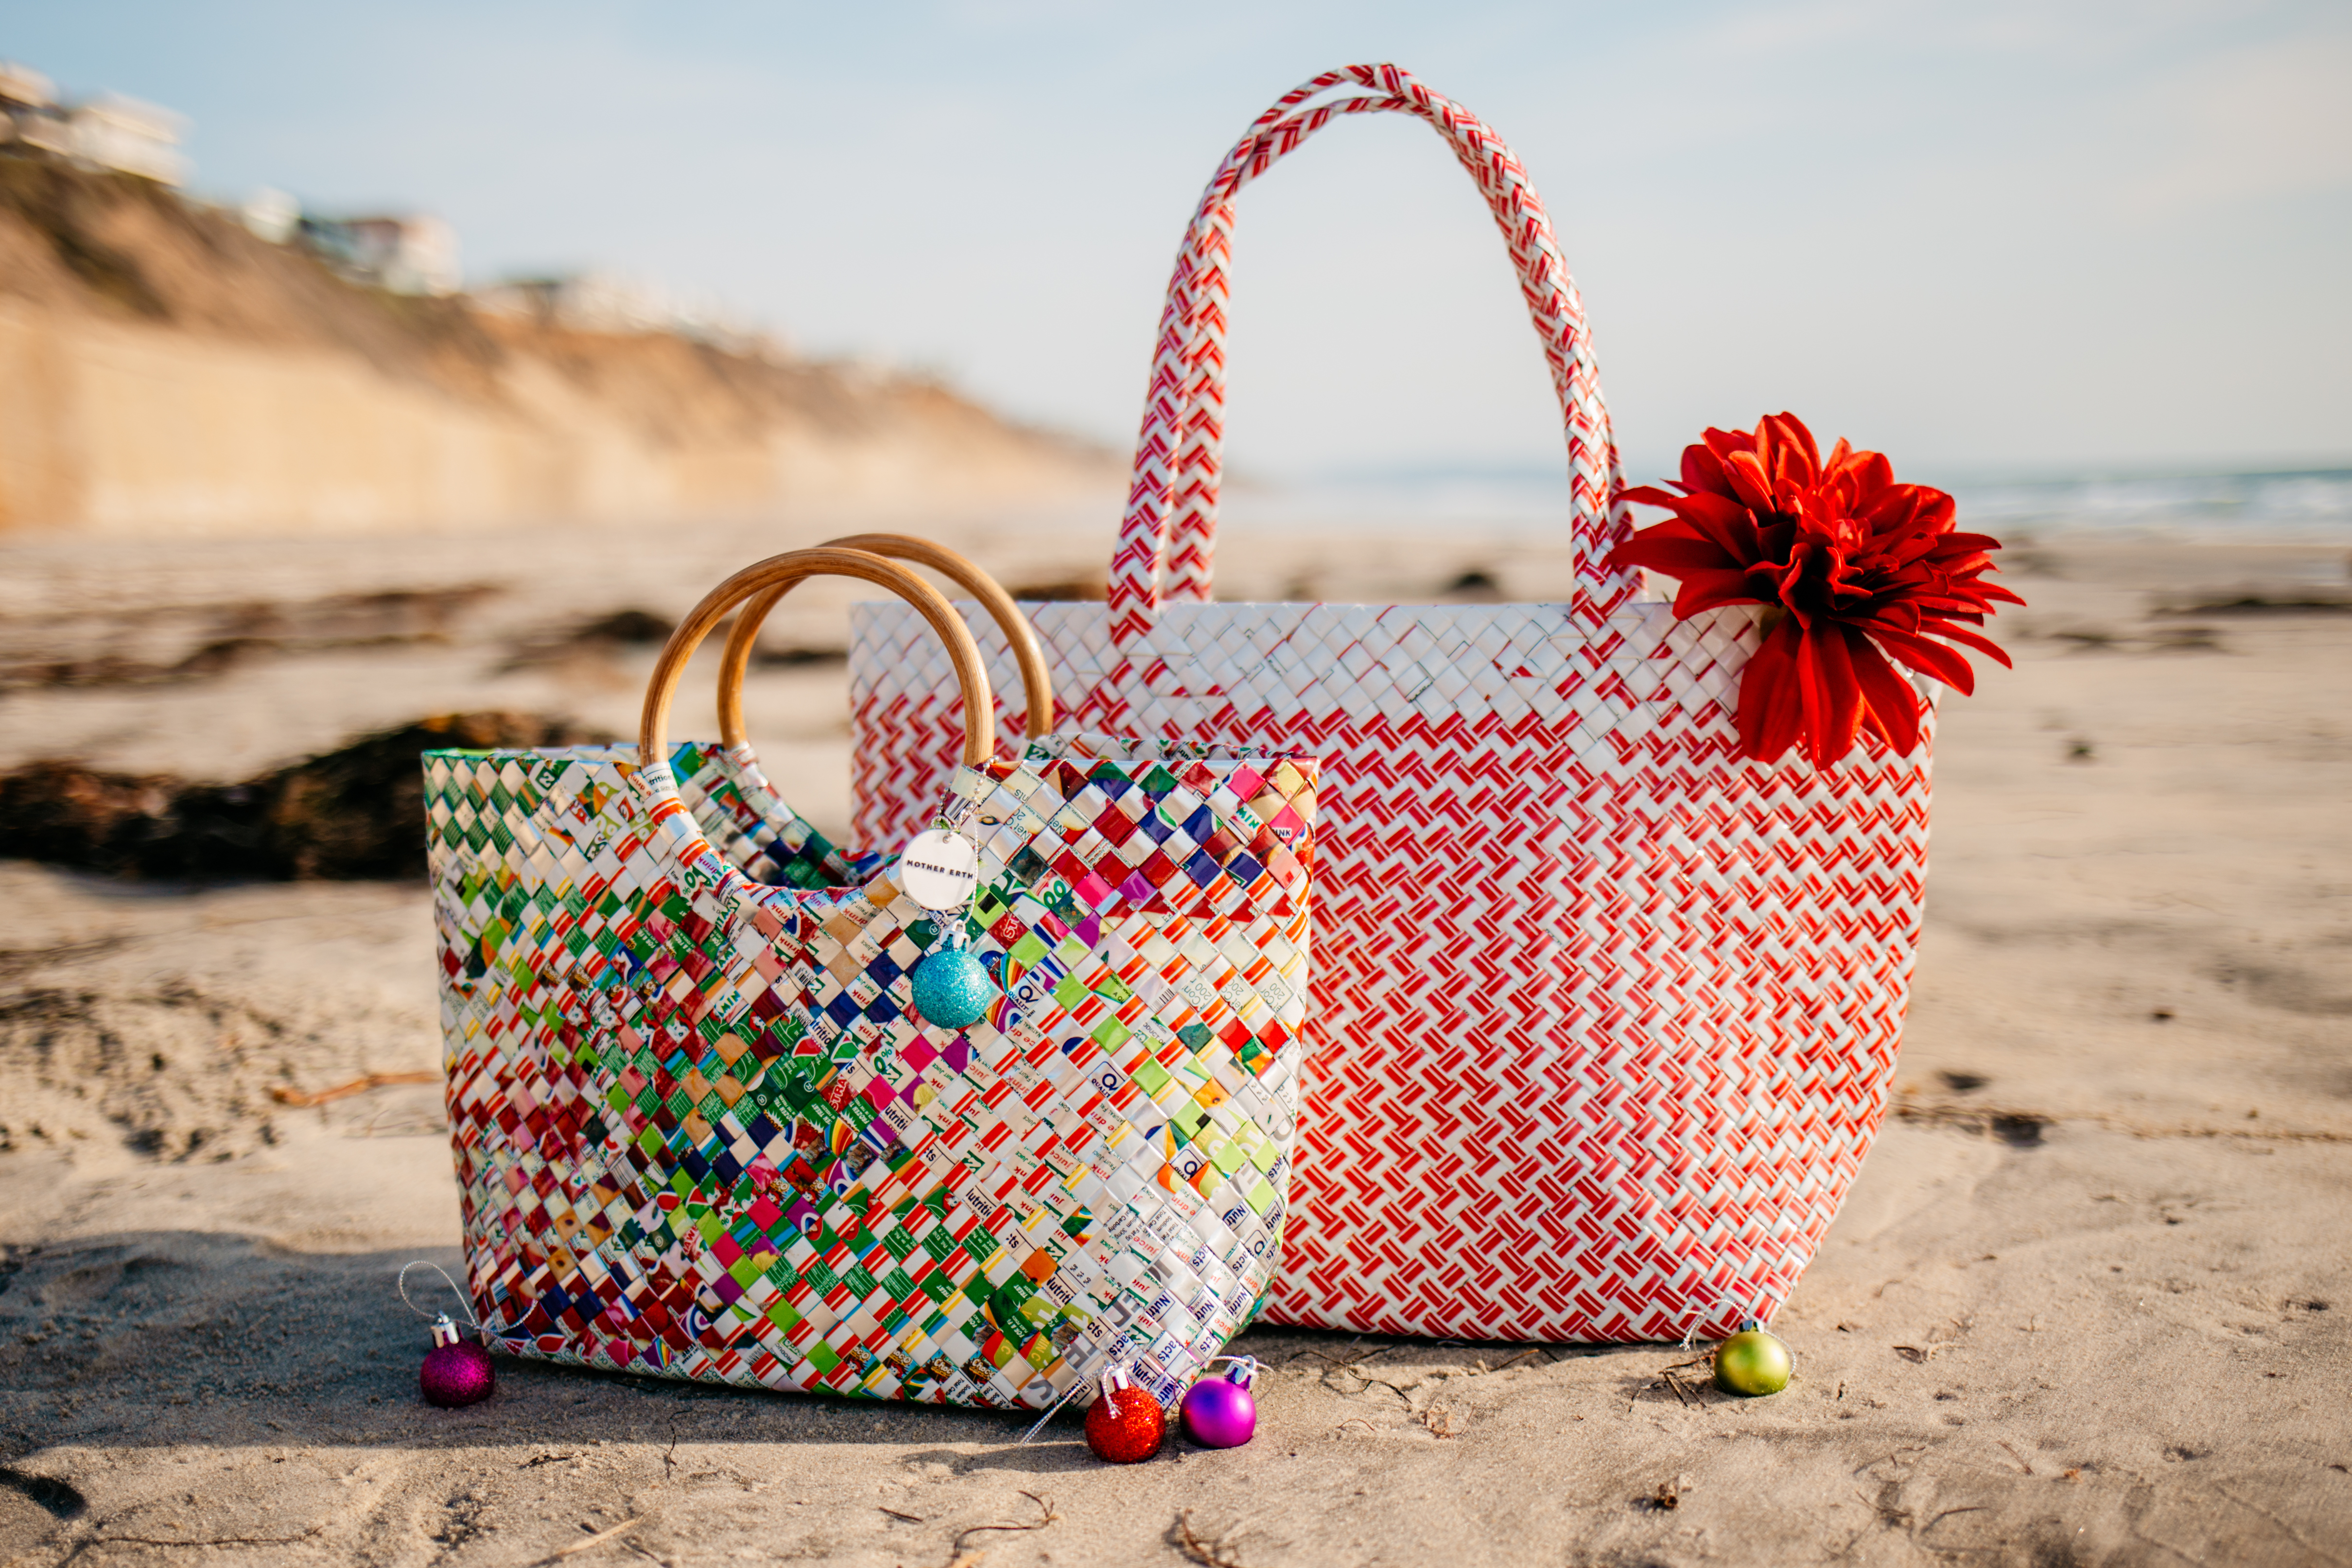 Two sustainable purses made of upcycled plastic on the beach, with small Christmas ornaments